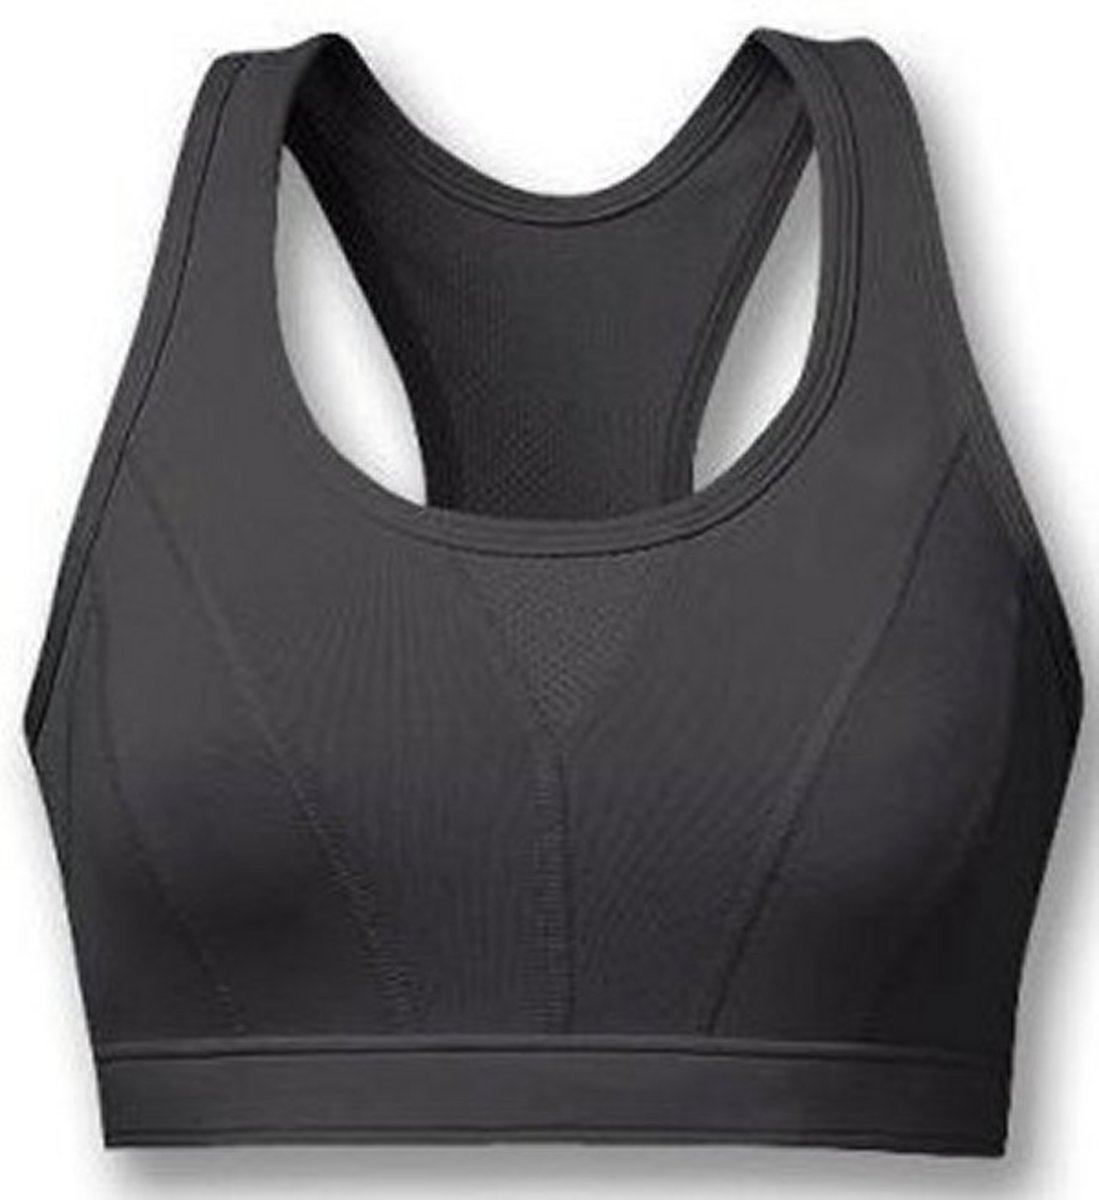 Sports bras will go a long way in keeping breasts from bouncing. This will avoid attracting unwanted attention while exercising and working out.